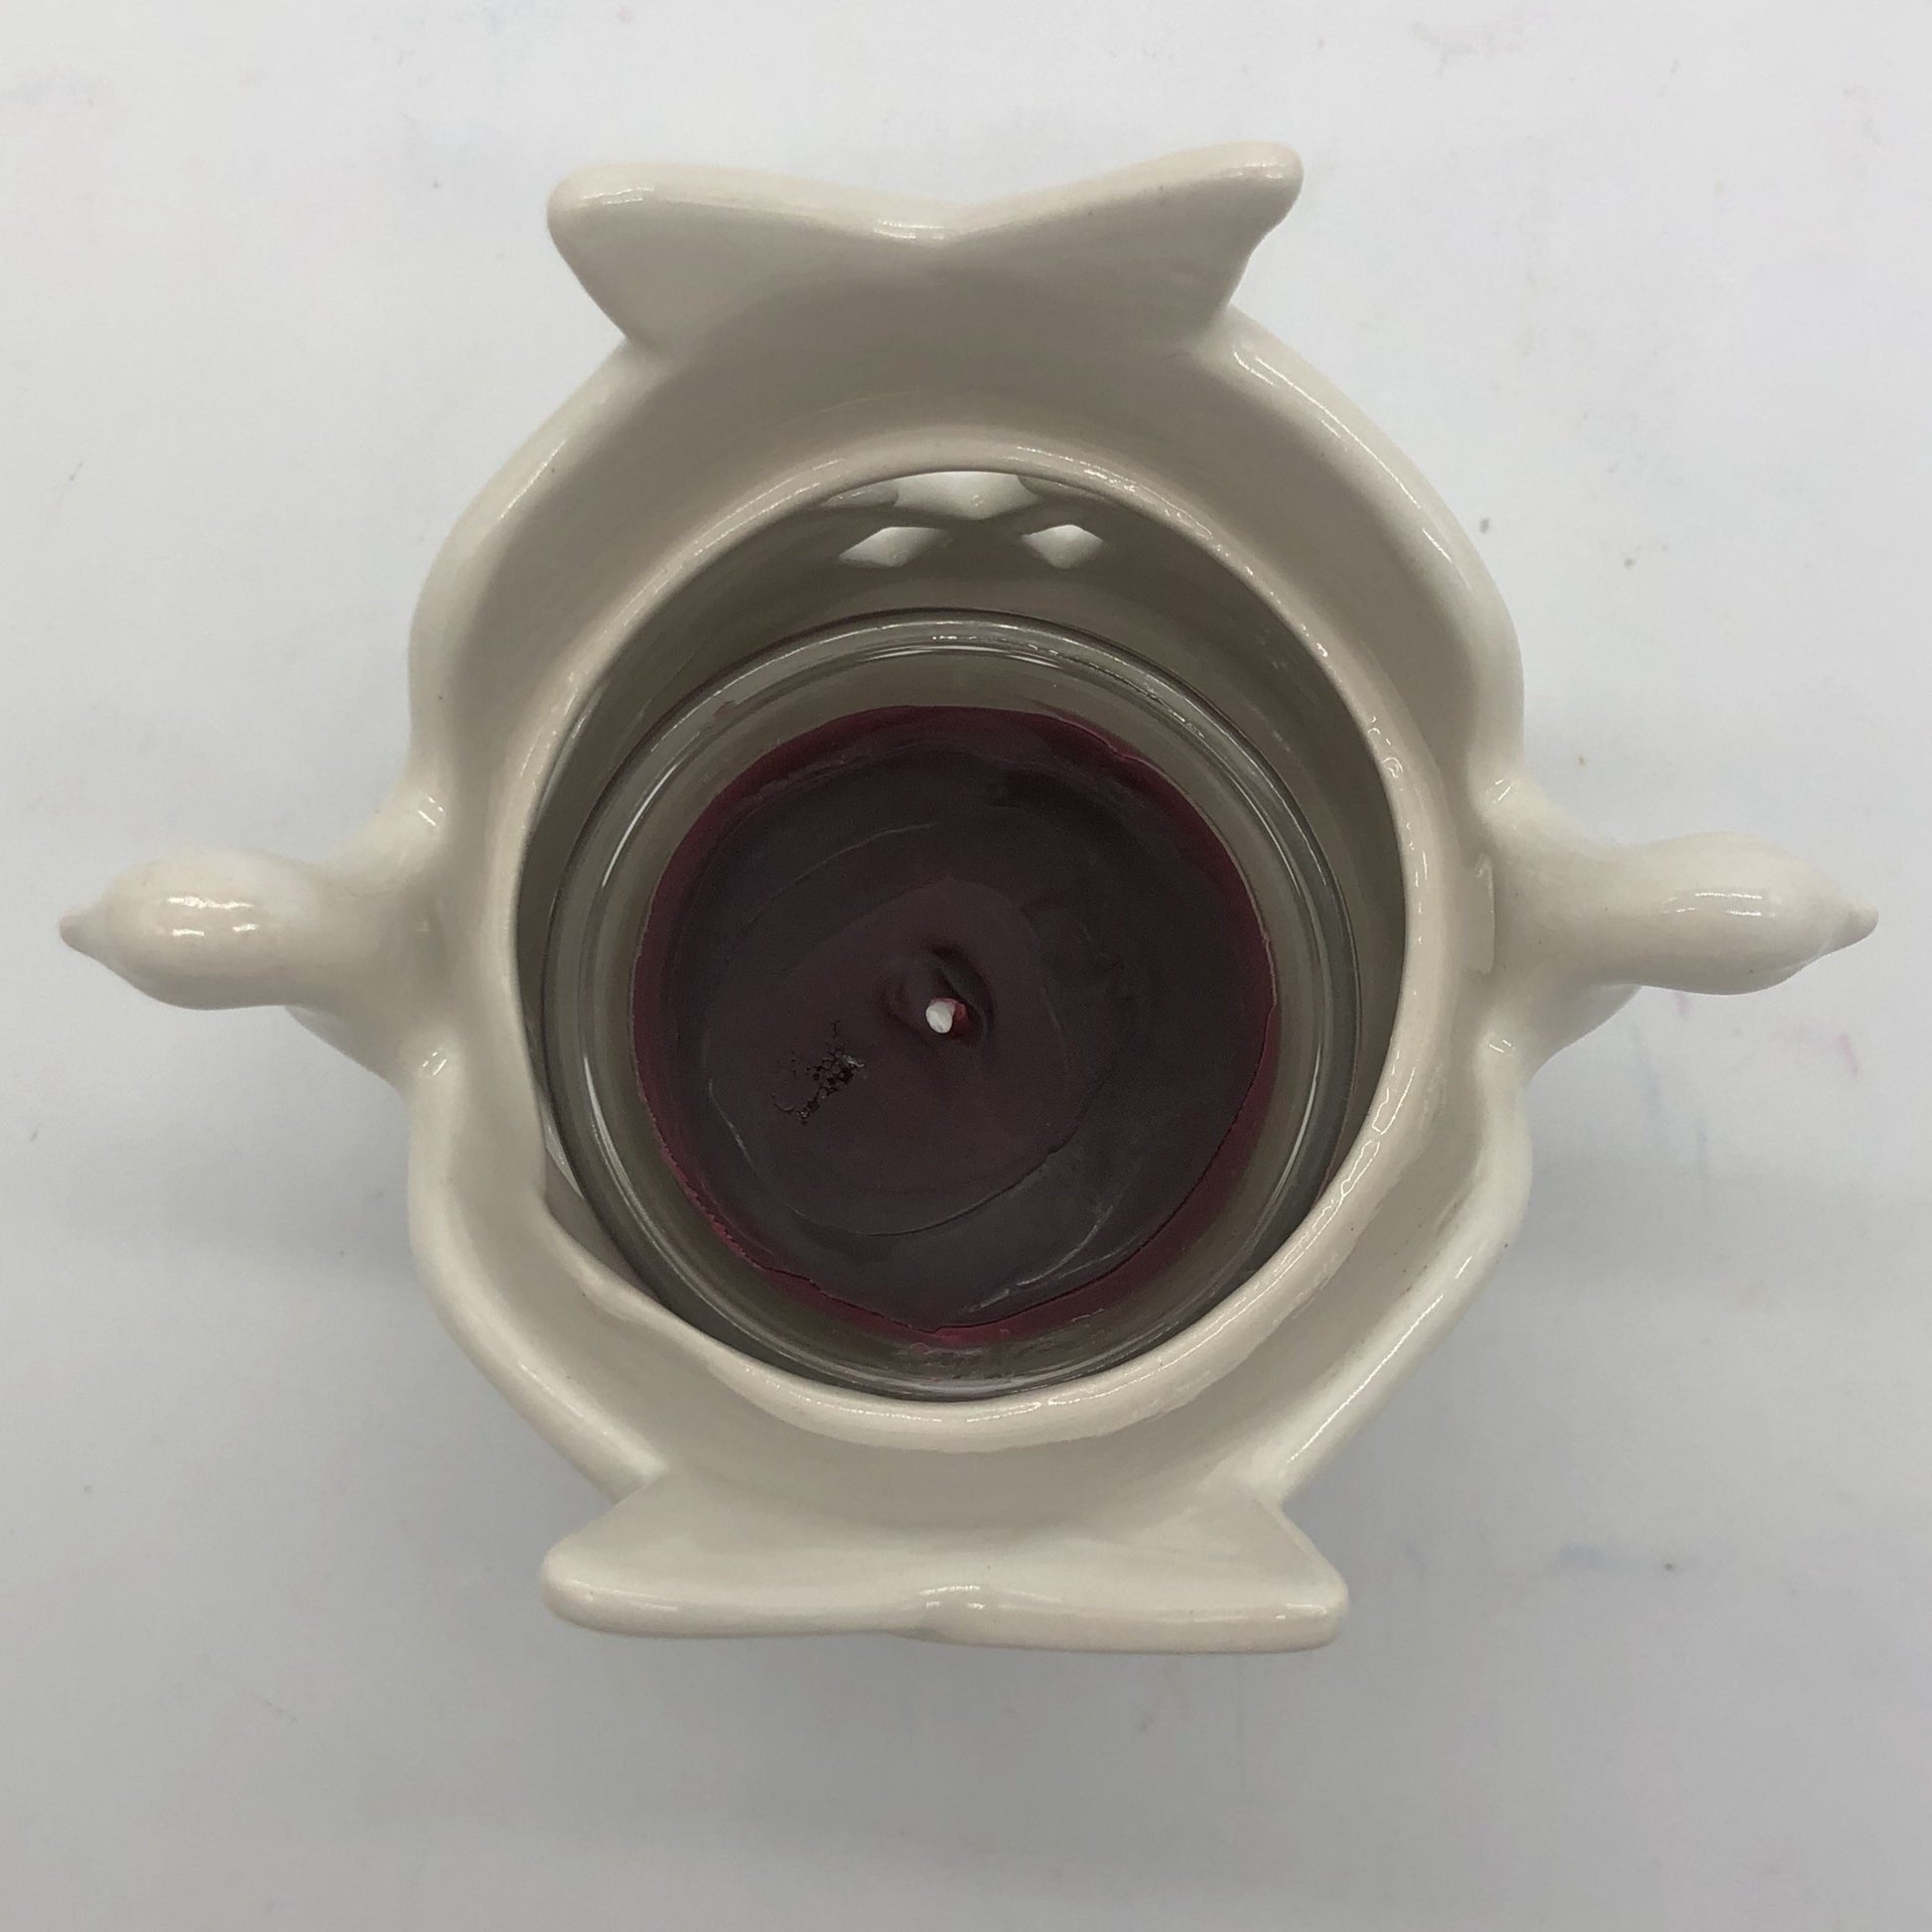 Top view of ceramic dove votive holder with maroon votive candle inside.